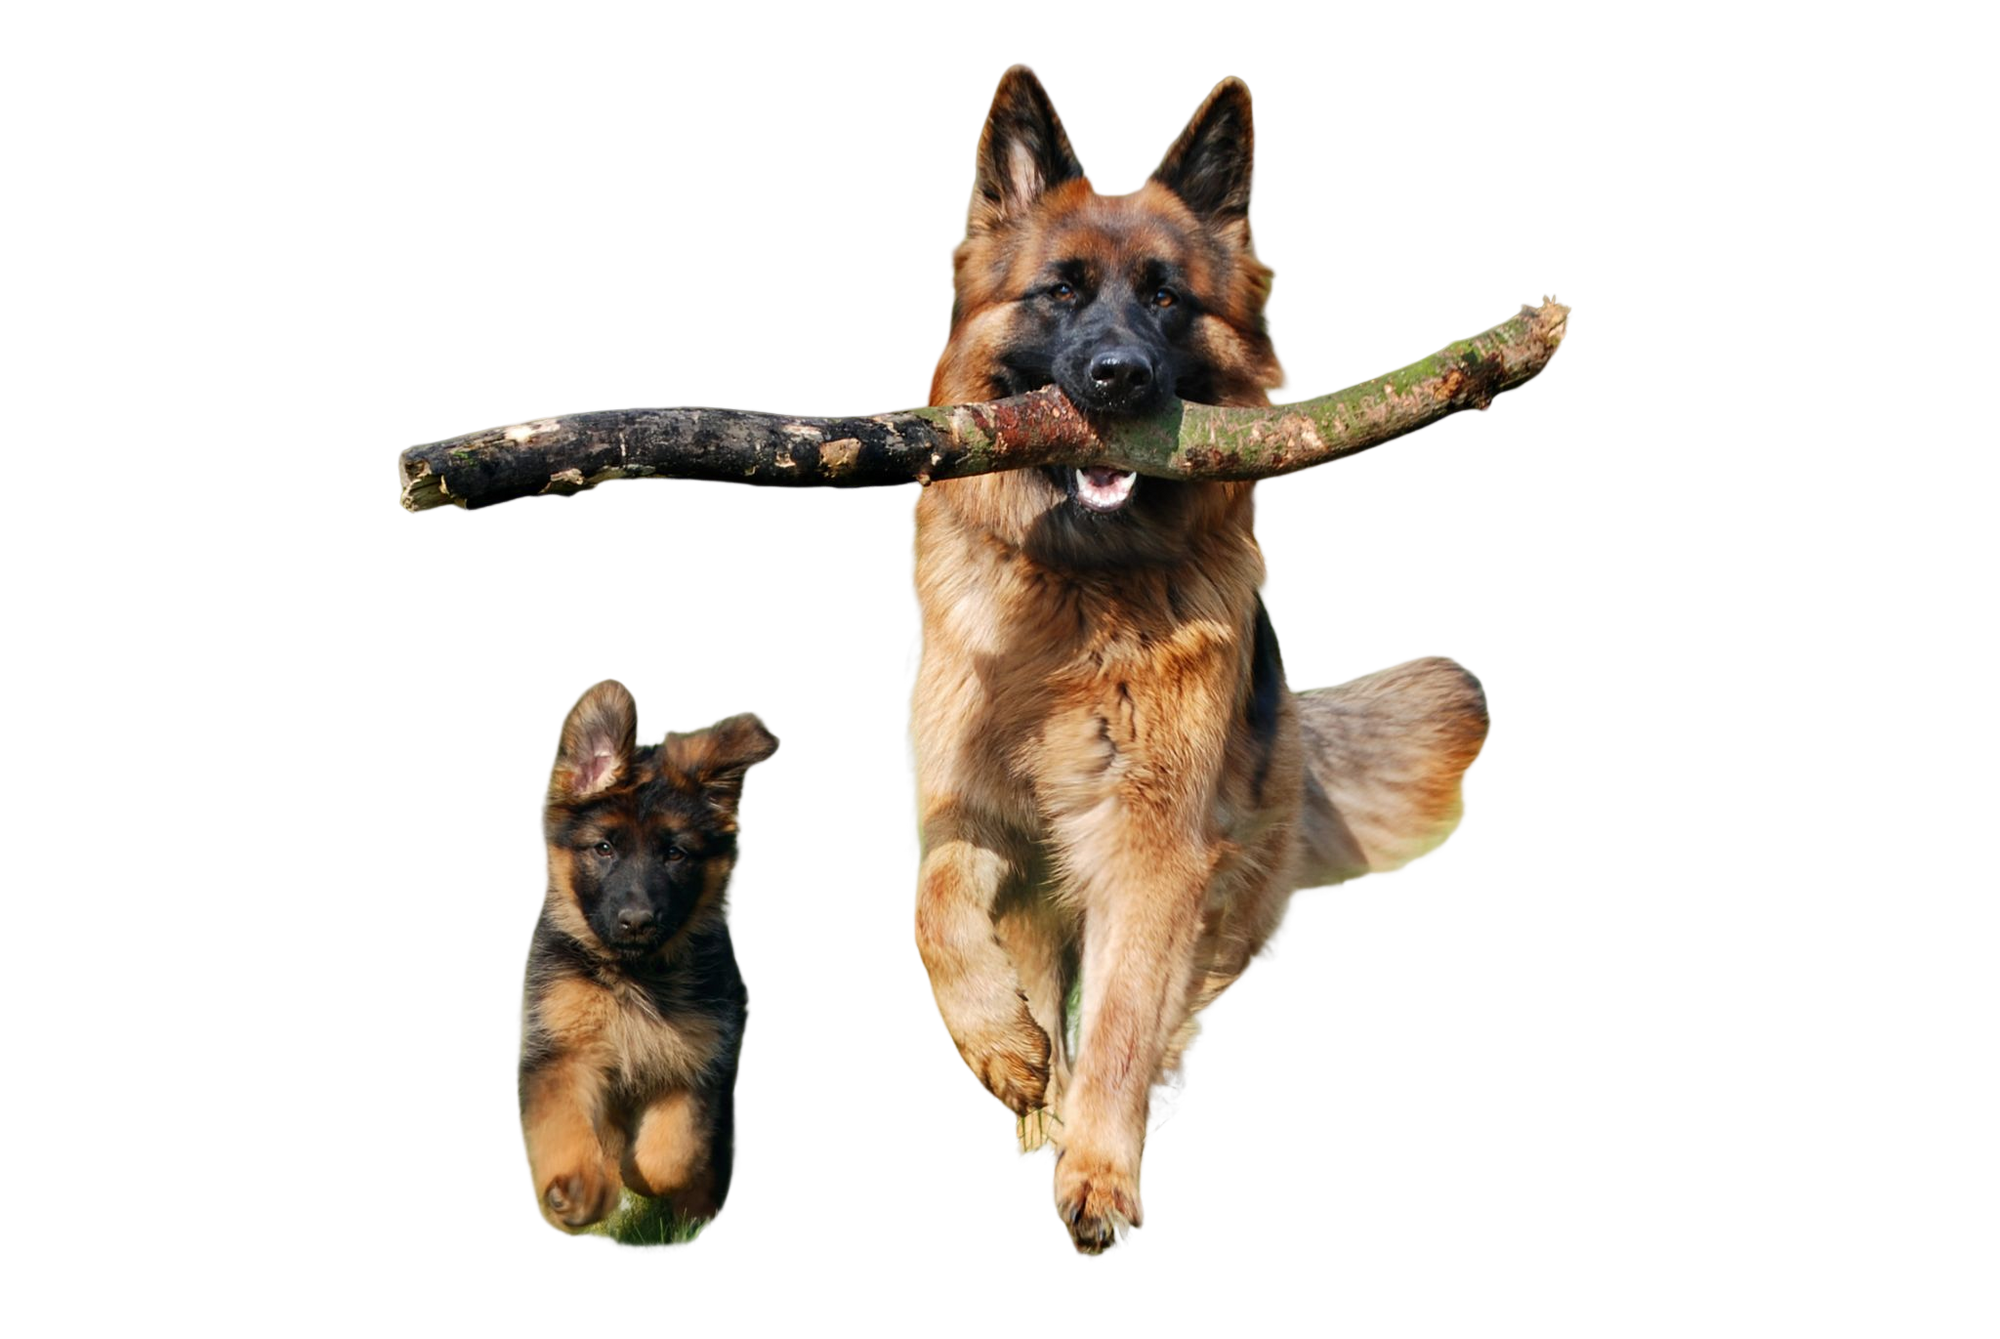 Final edited image of the puppy and dog, cut out of the scene, now against a transparent background.